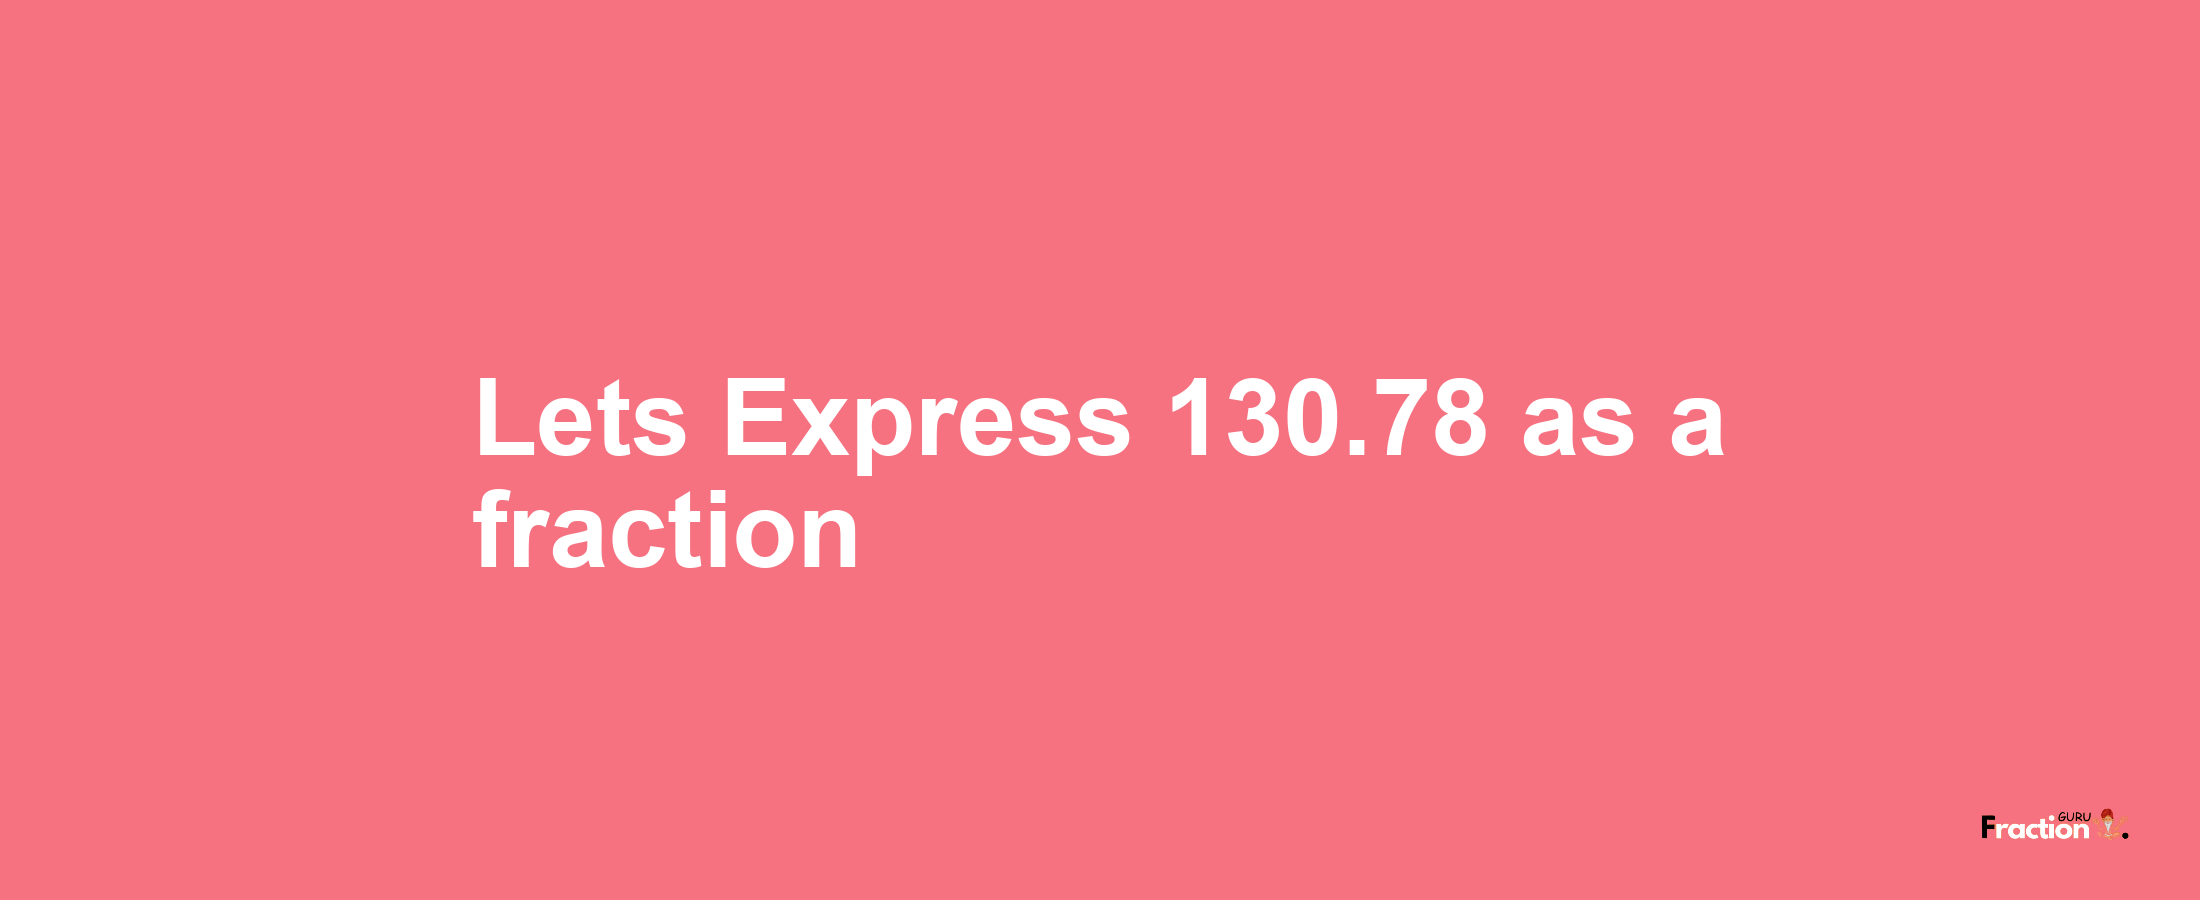 Lets Express 130.78 as afraction